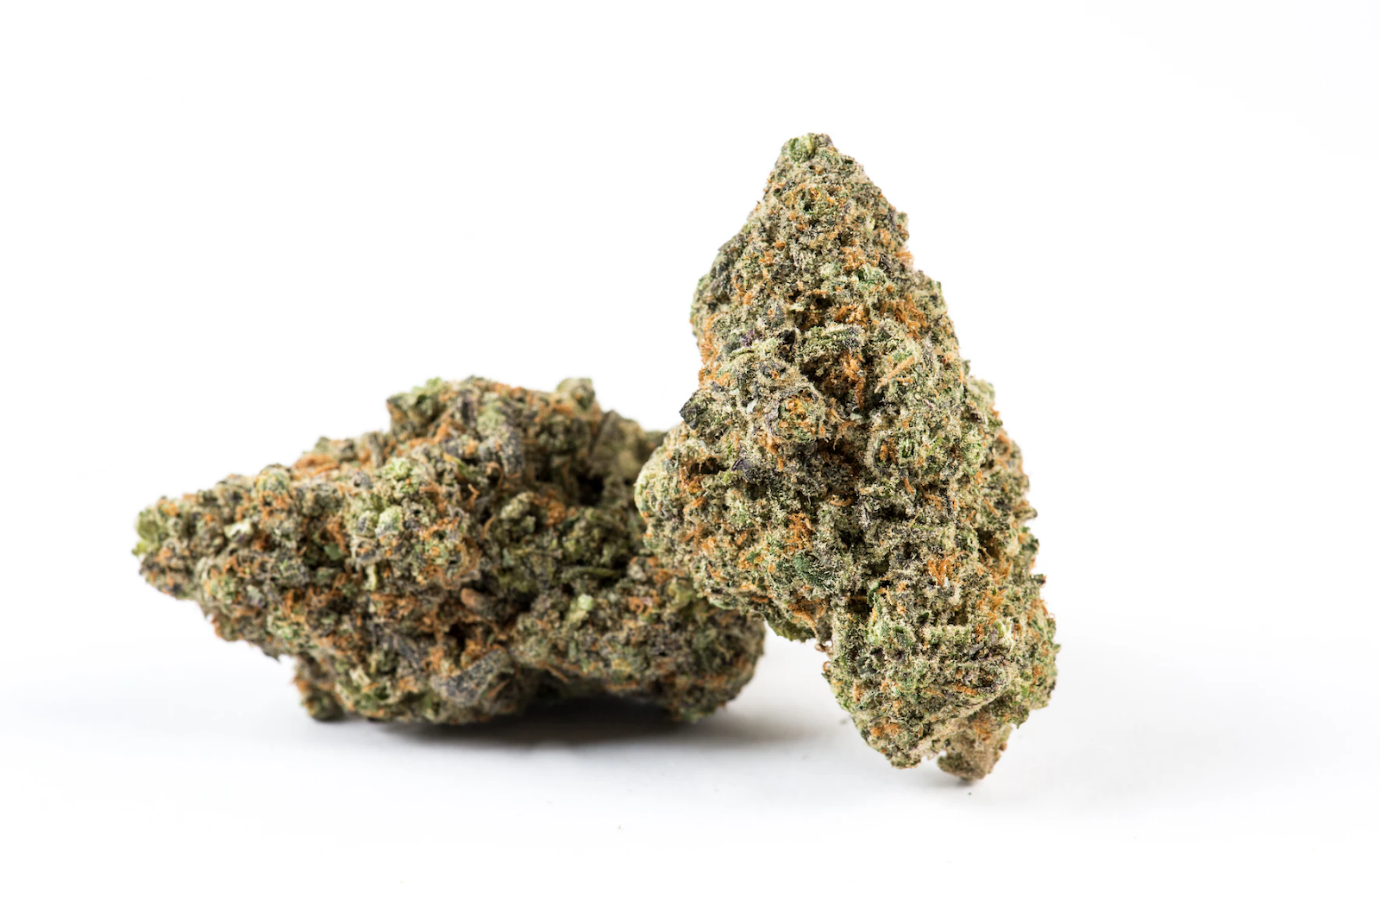 Grease Gun Strain Review and Information